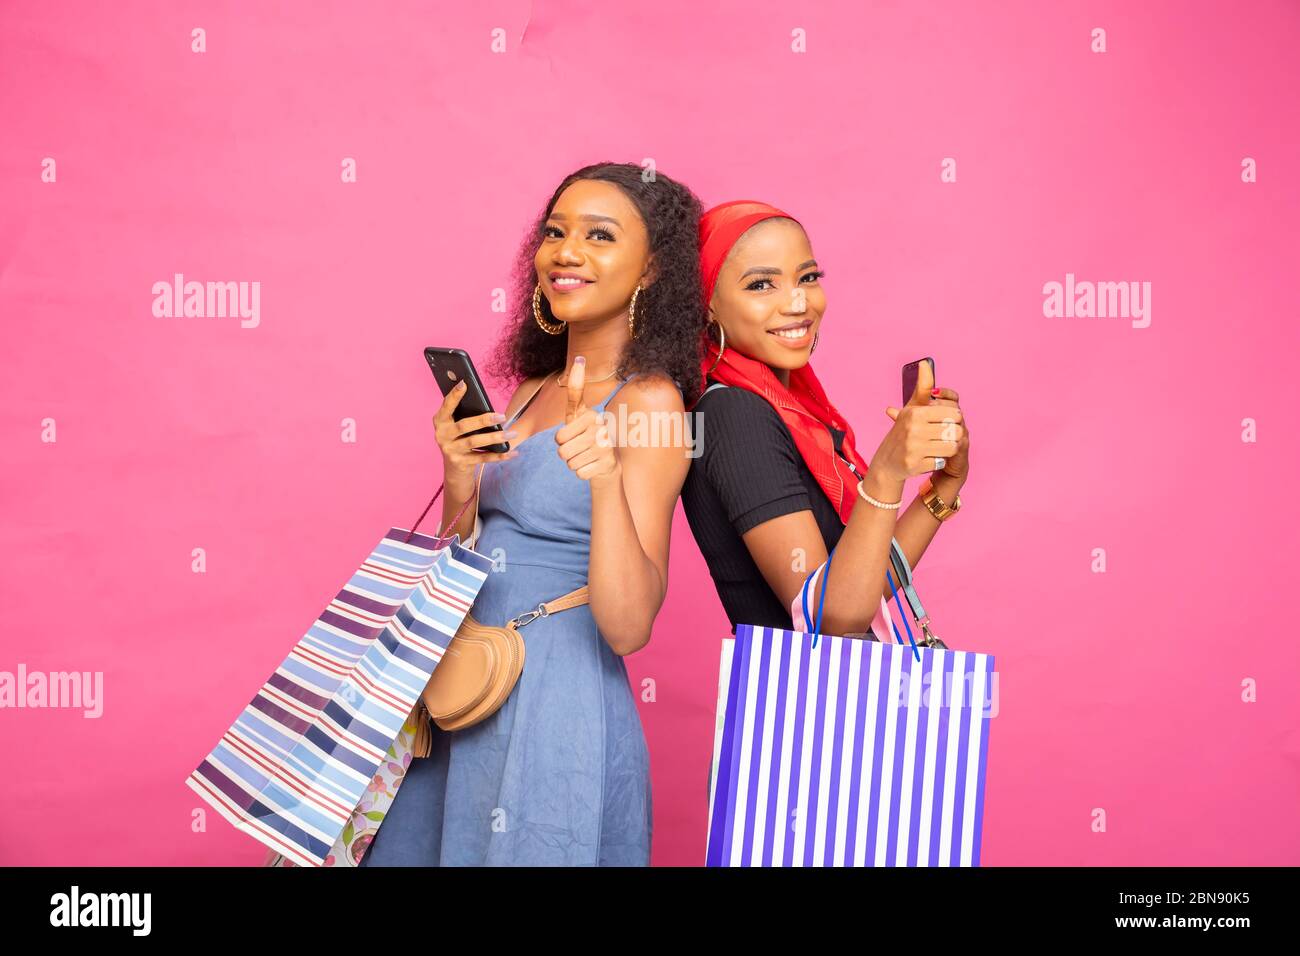 beautiful young african girls holding shopping bags standing back to back, holding their phones, smiling and giving thumbs up Stock Photo